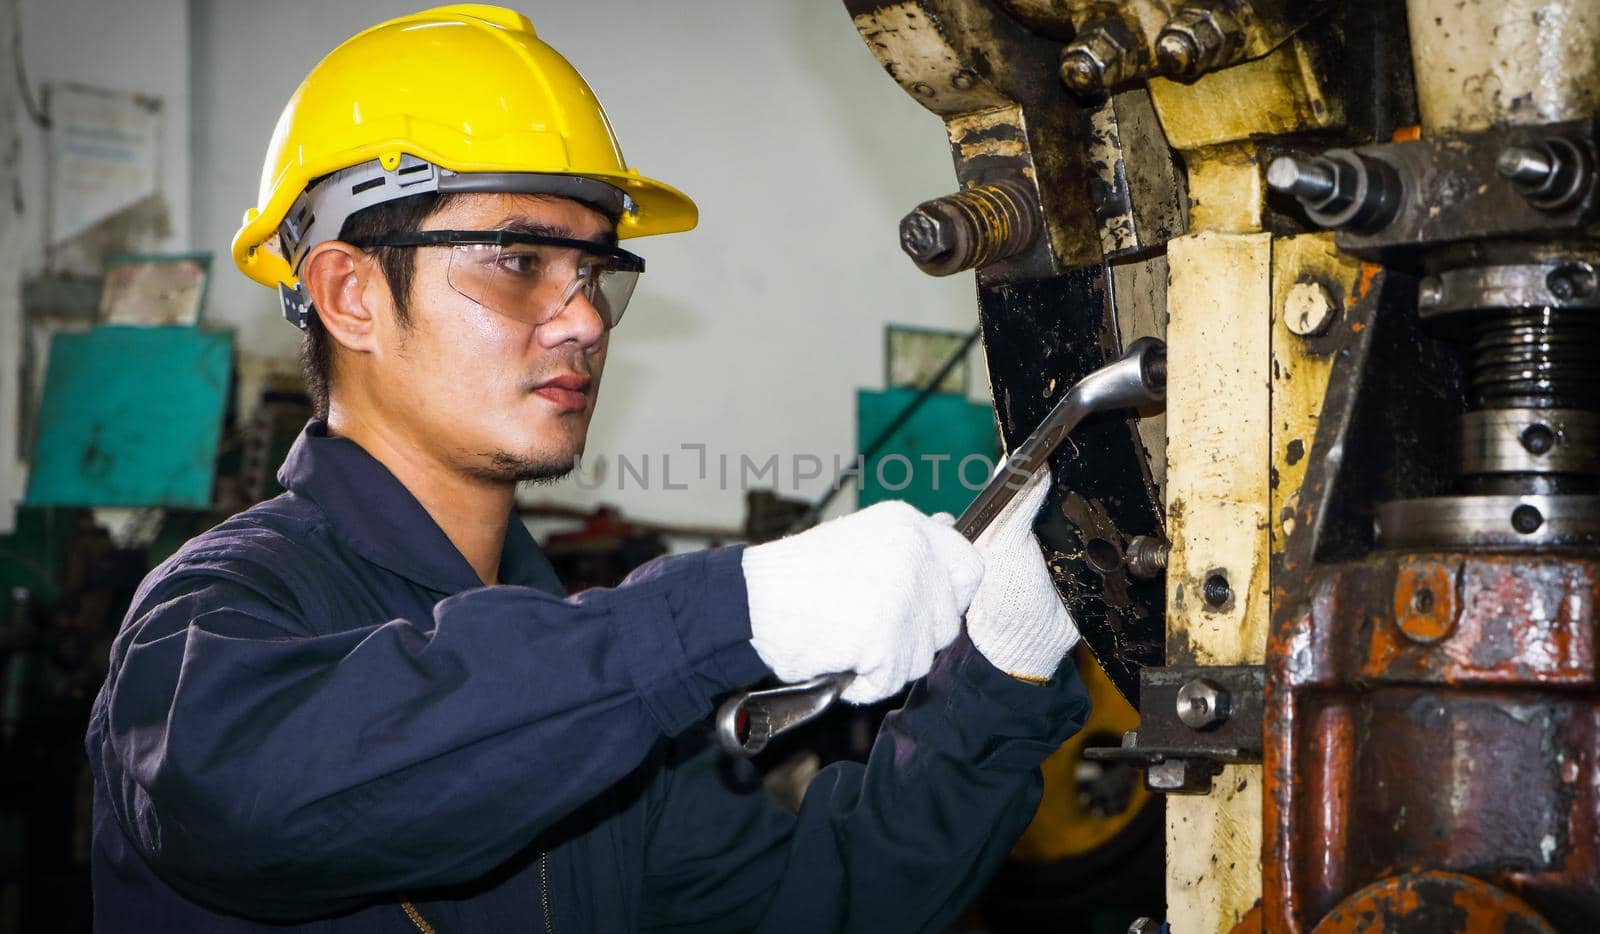 Asian male worker In industries that wear glasses, safety hats and safety uniforms Wrench tool holder stand by atitaph